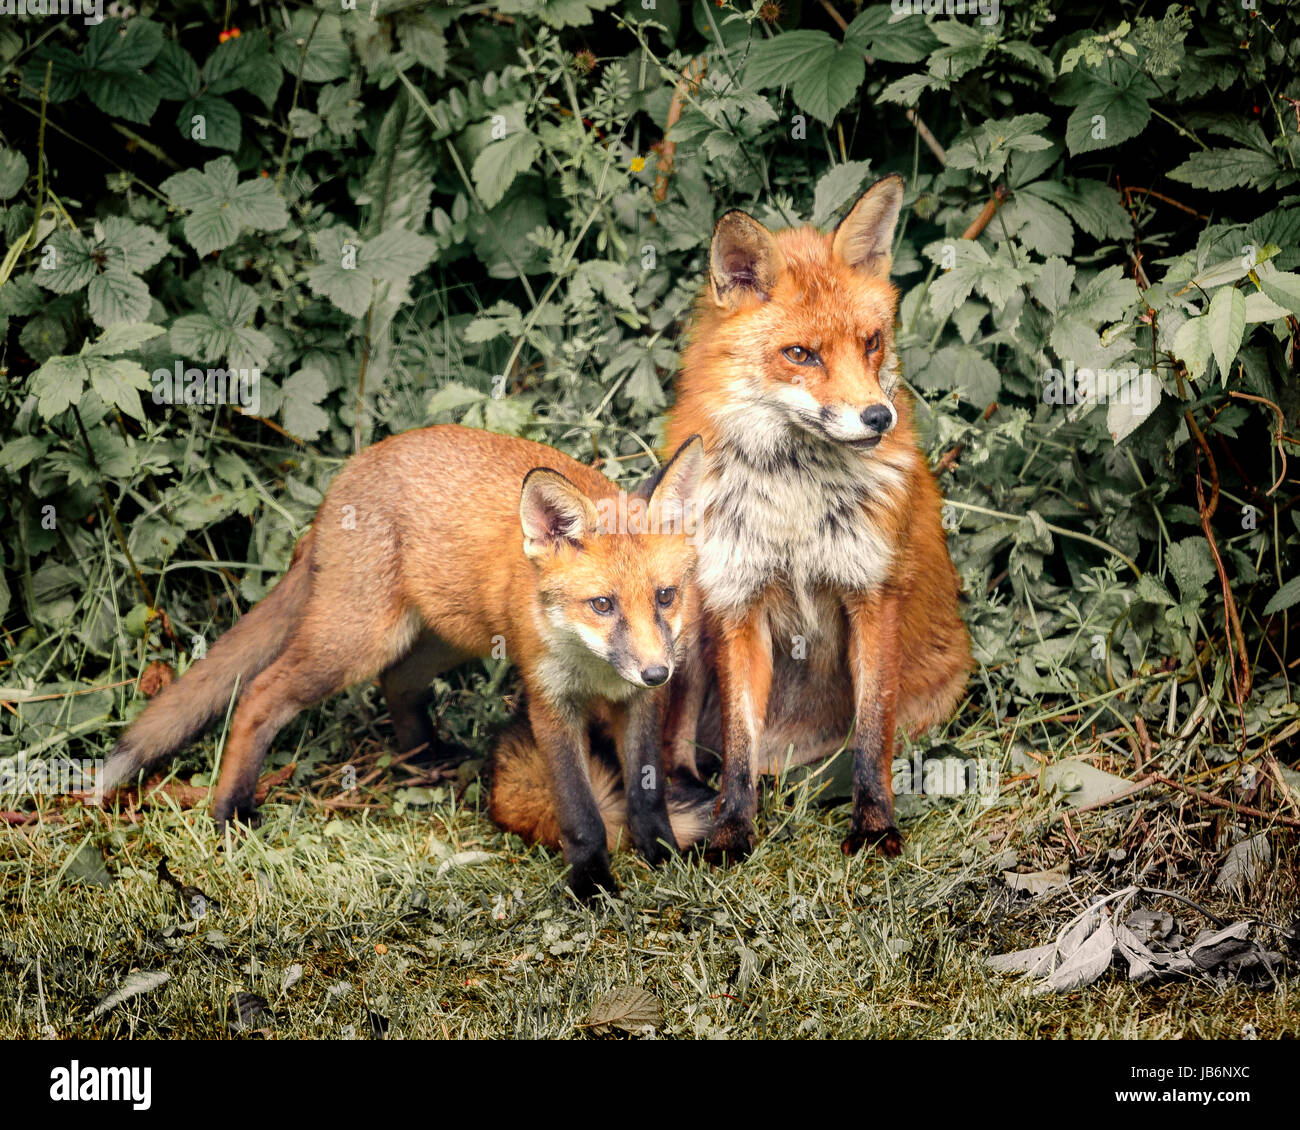 Urban Fox with cub, Leeds, West Yorkshire, UK. 9th Jun, 2017. Urban. Foxes in a suburban Leeds garden. Residents Lynne and Ian Wray awoke to the beautiful sight of a vixen preening her cub in the morning sunshine. Suddenly alerted by a noise, the cub darted into the undergrowth, whilst the mother prowled off to investigate, disappearing into the hedge further along the garden. Copyright Credit: Ian Wray/Alamy Live News Stock Photo